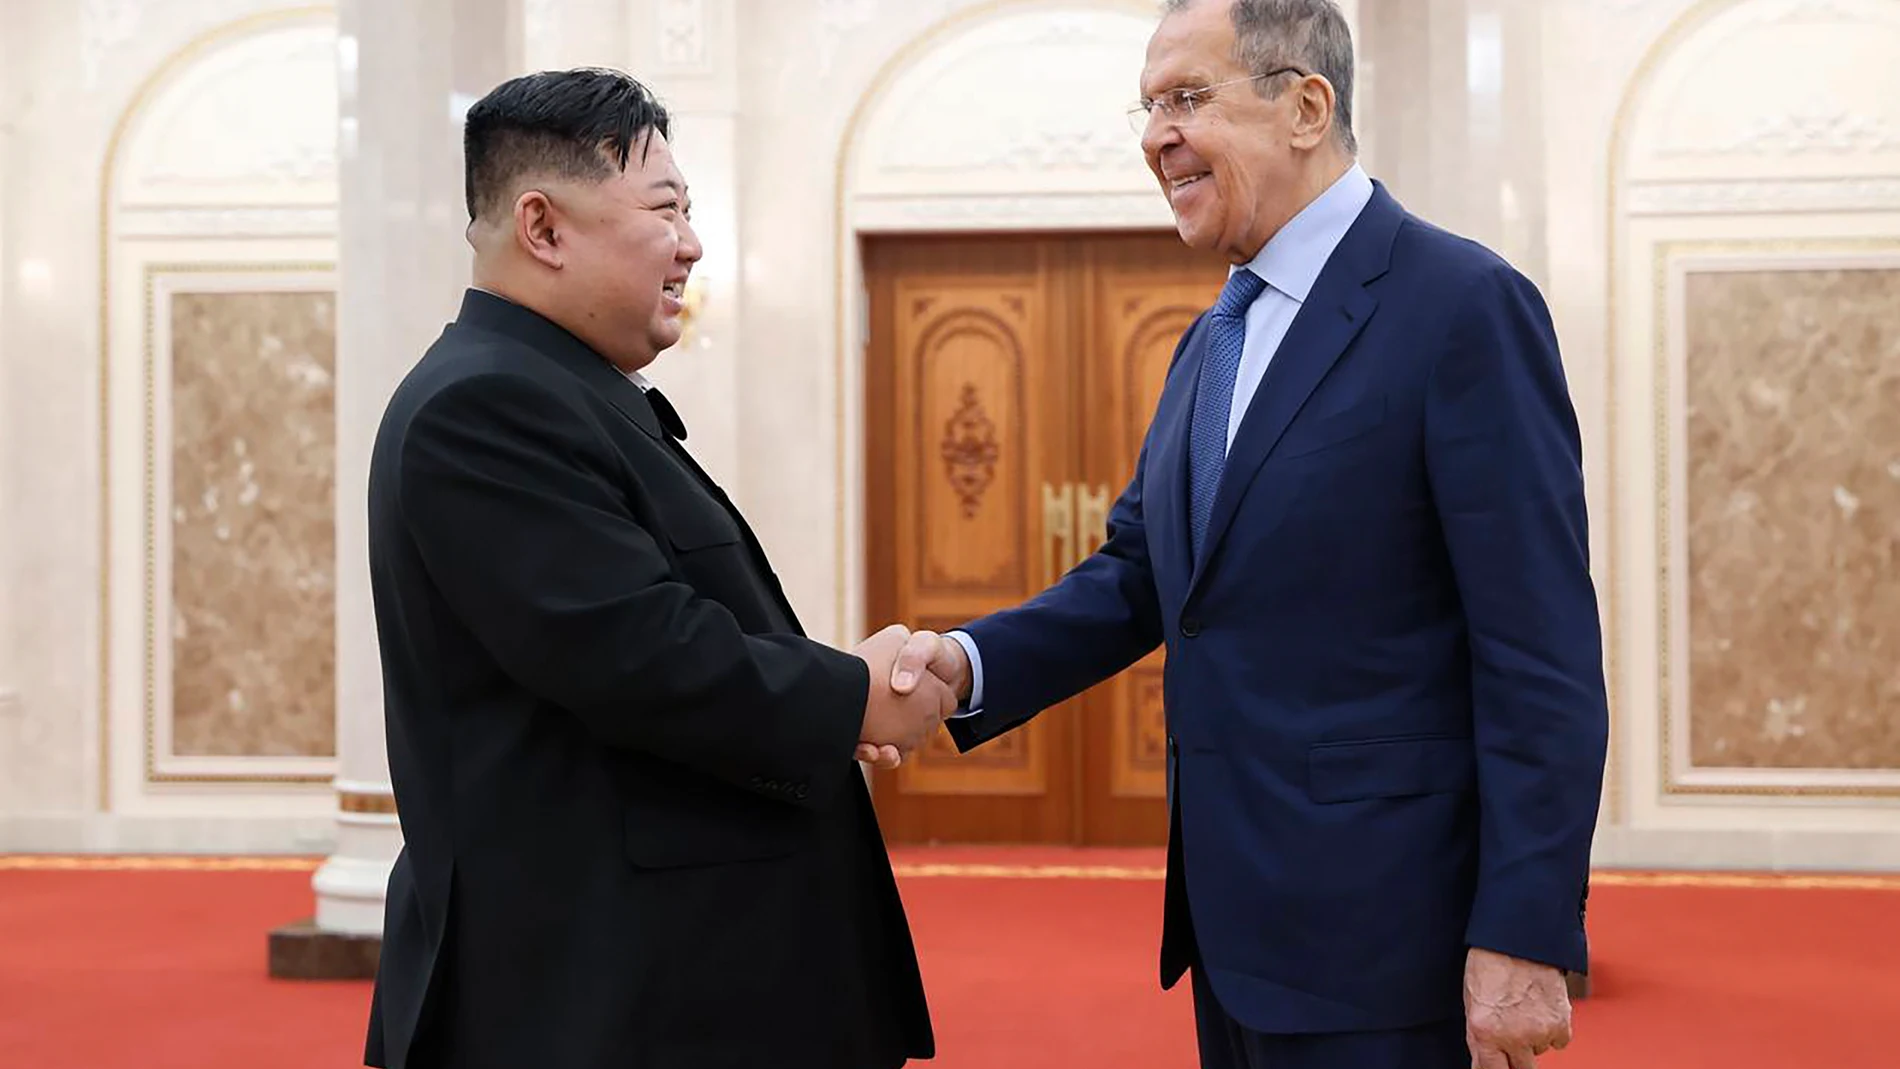 Pyongyang (Korea, Democratic People''s Republic Of), 19/10/2023.- A handout photo made available by the Russian Foreign Ministry press service shows Russian Foreign Minister Sergei Lavrov (R) shaking hands with North Korea's leader Kim Jong Un during their meeting in Pyongyang, North Korea, 19 October 2023. Sergei Lavrov is on a two-day visit to North Korea. The Russian foreign minister said that Moscow plans to develop equal strategic cooperation with the DPRK, despite sanctions from the UN ...